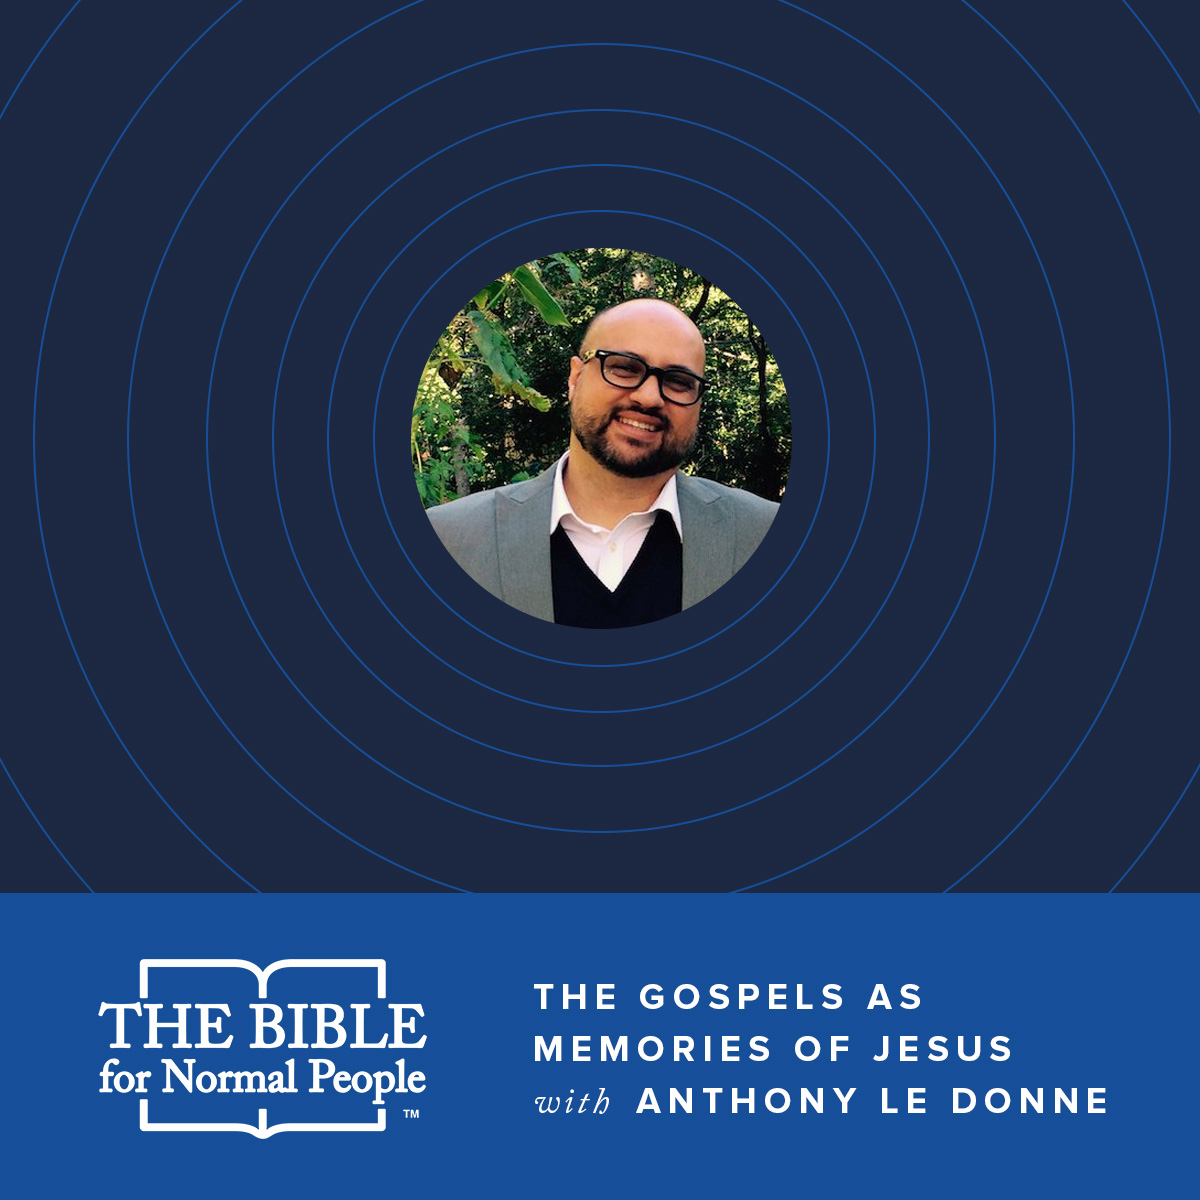 Interview with Anthony Le Donne: The Gospels as Memories of Jesus